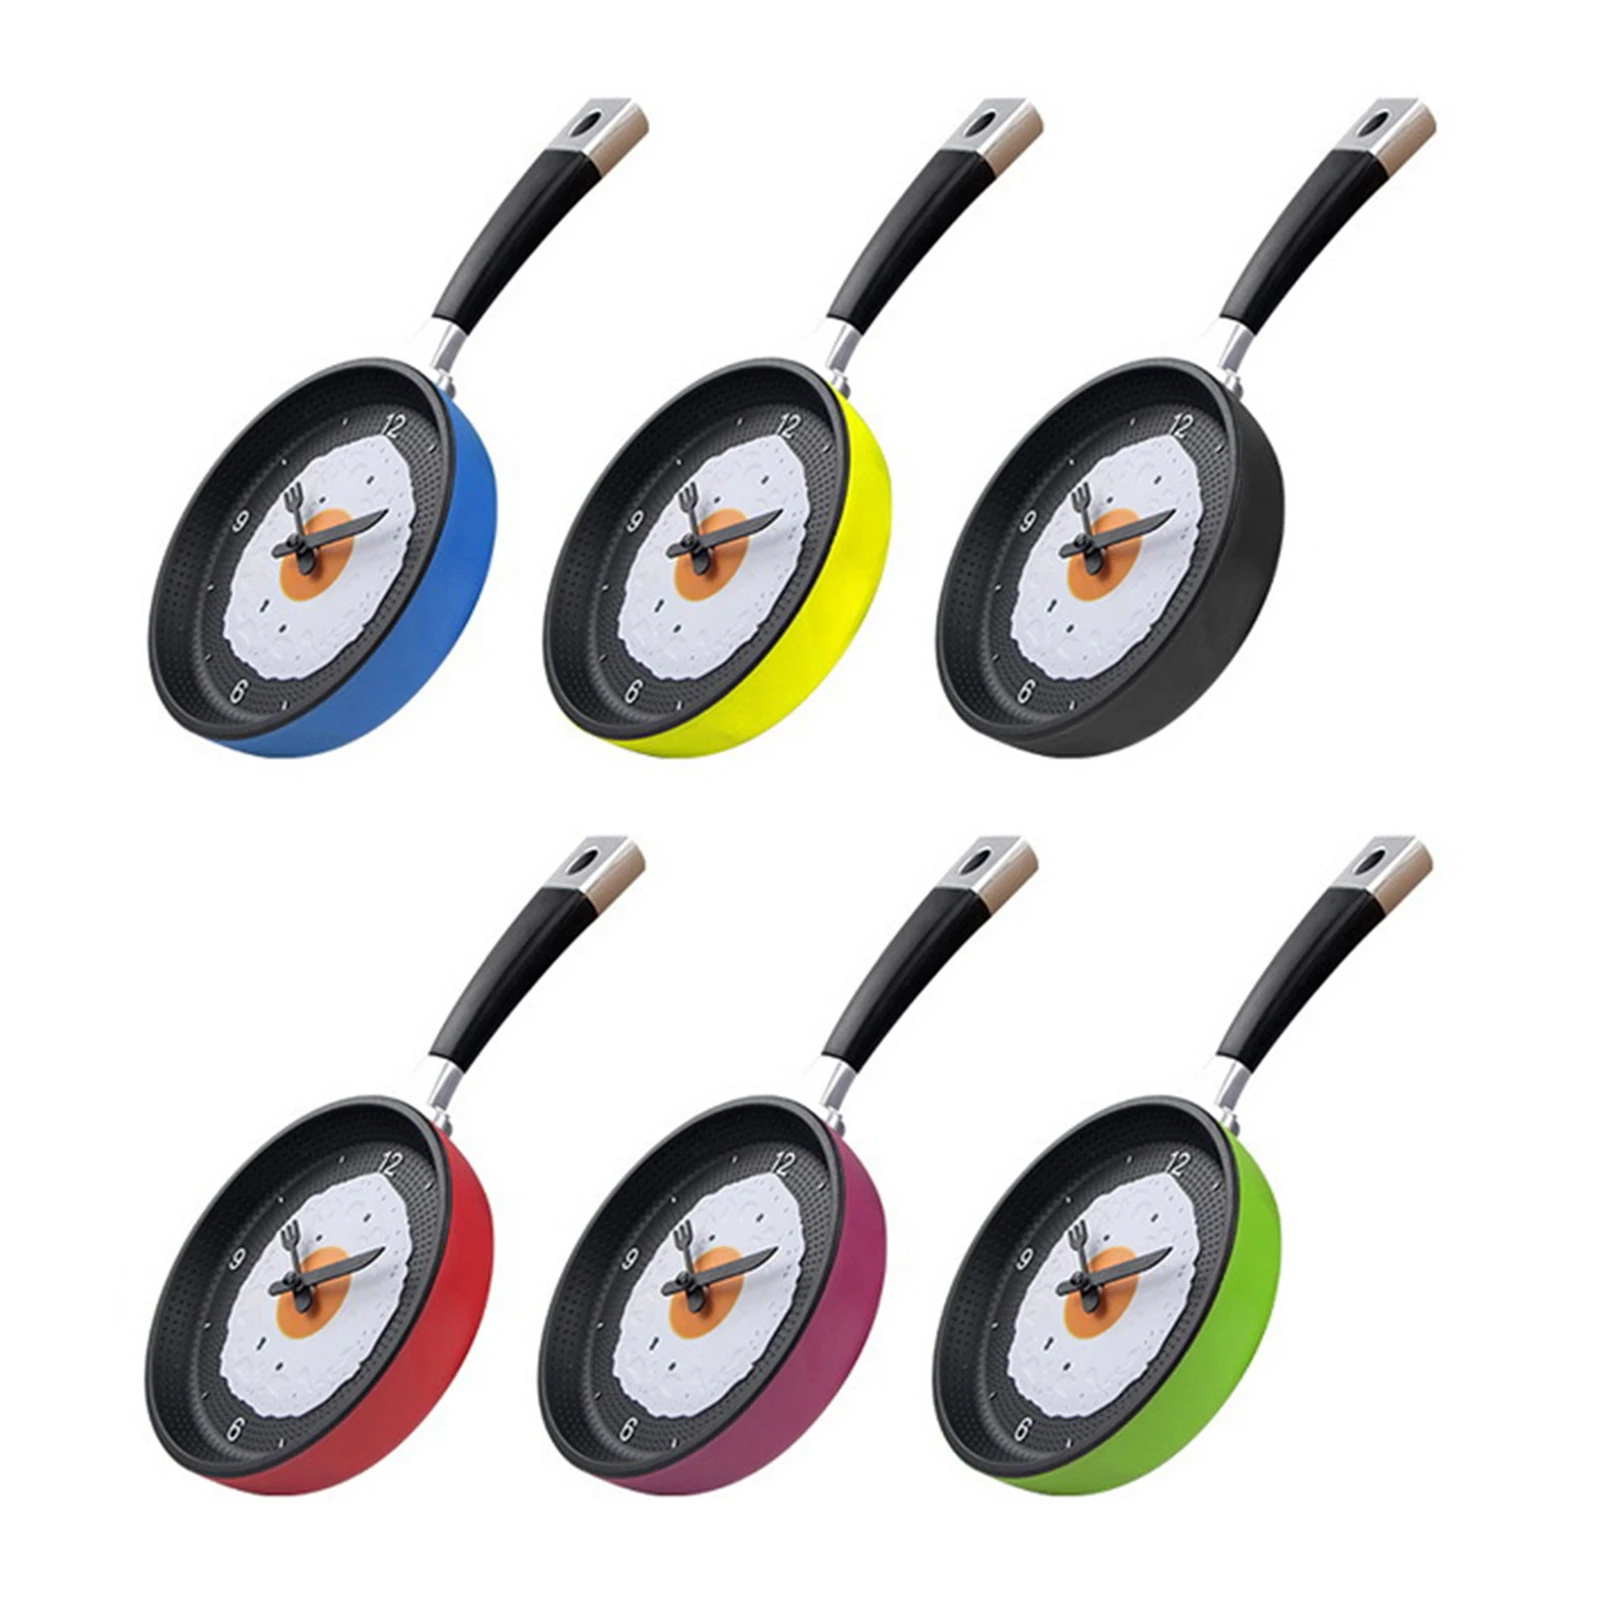 Frying Pan with Fried Egg Shaped Wall Clock Orange Back, Shabby Chic,Kitchen Themed Unique Wall Clock